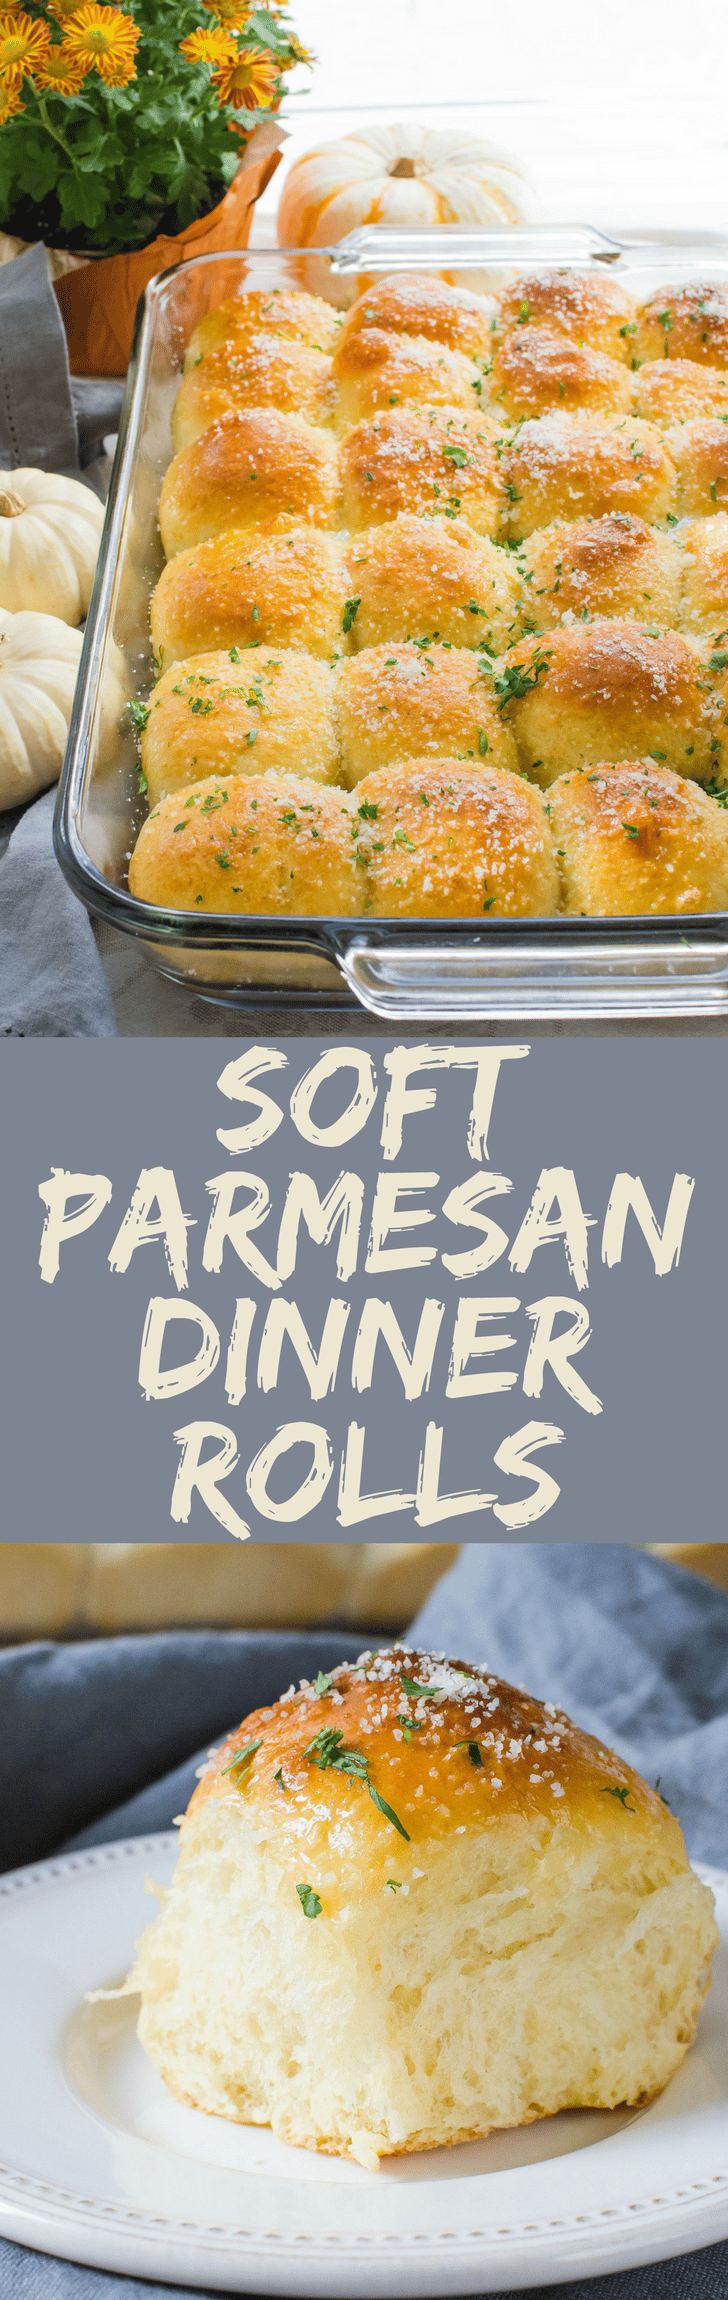 This easy yeast roll recipe feeds a crowd. Soft Parmesan Dinner Rolls are great for Thanksgiving, Christmas or any holiday! With tips to perfect the recipe! #bread #rolls #thanksgiving #christmas #dinnerrolls #yeastrolls #holidaysides #sidedish #homemadebread #parmesan #yeast #softrolls #homemaderolls #softrollrecipe #cheeserolls #cheesebread #theonlyparmesan